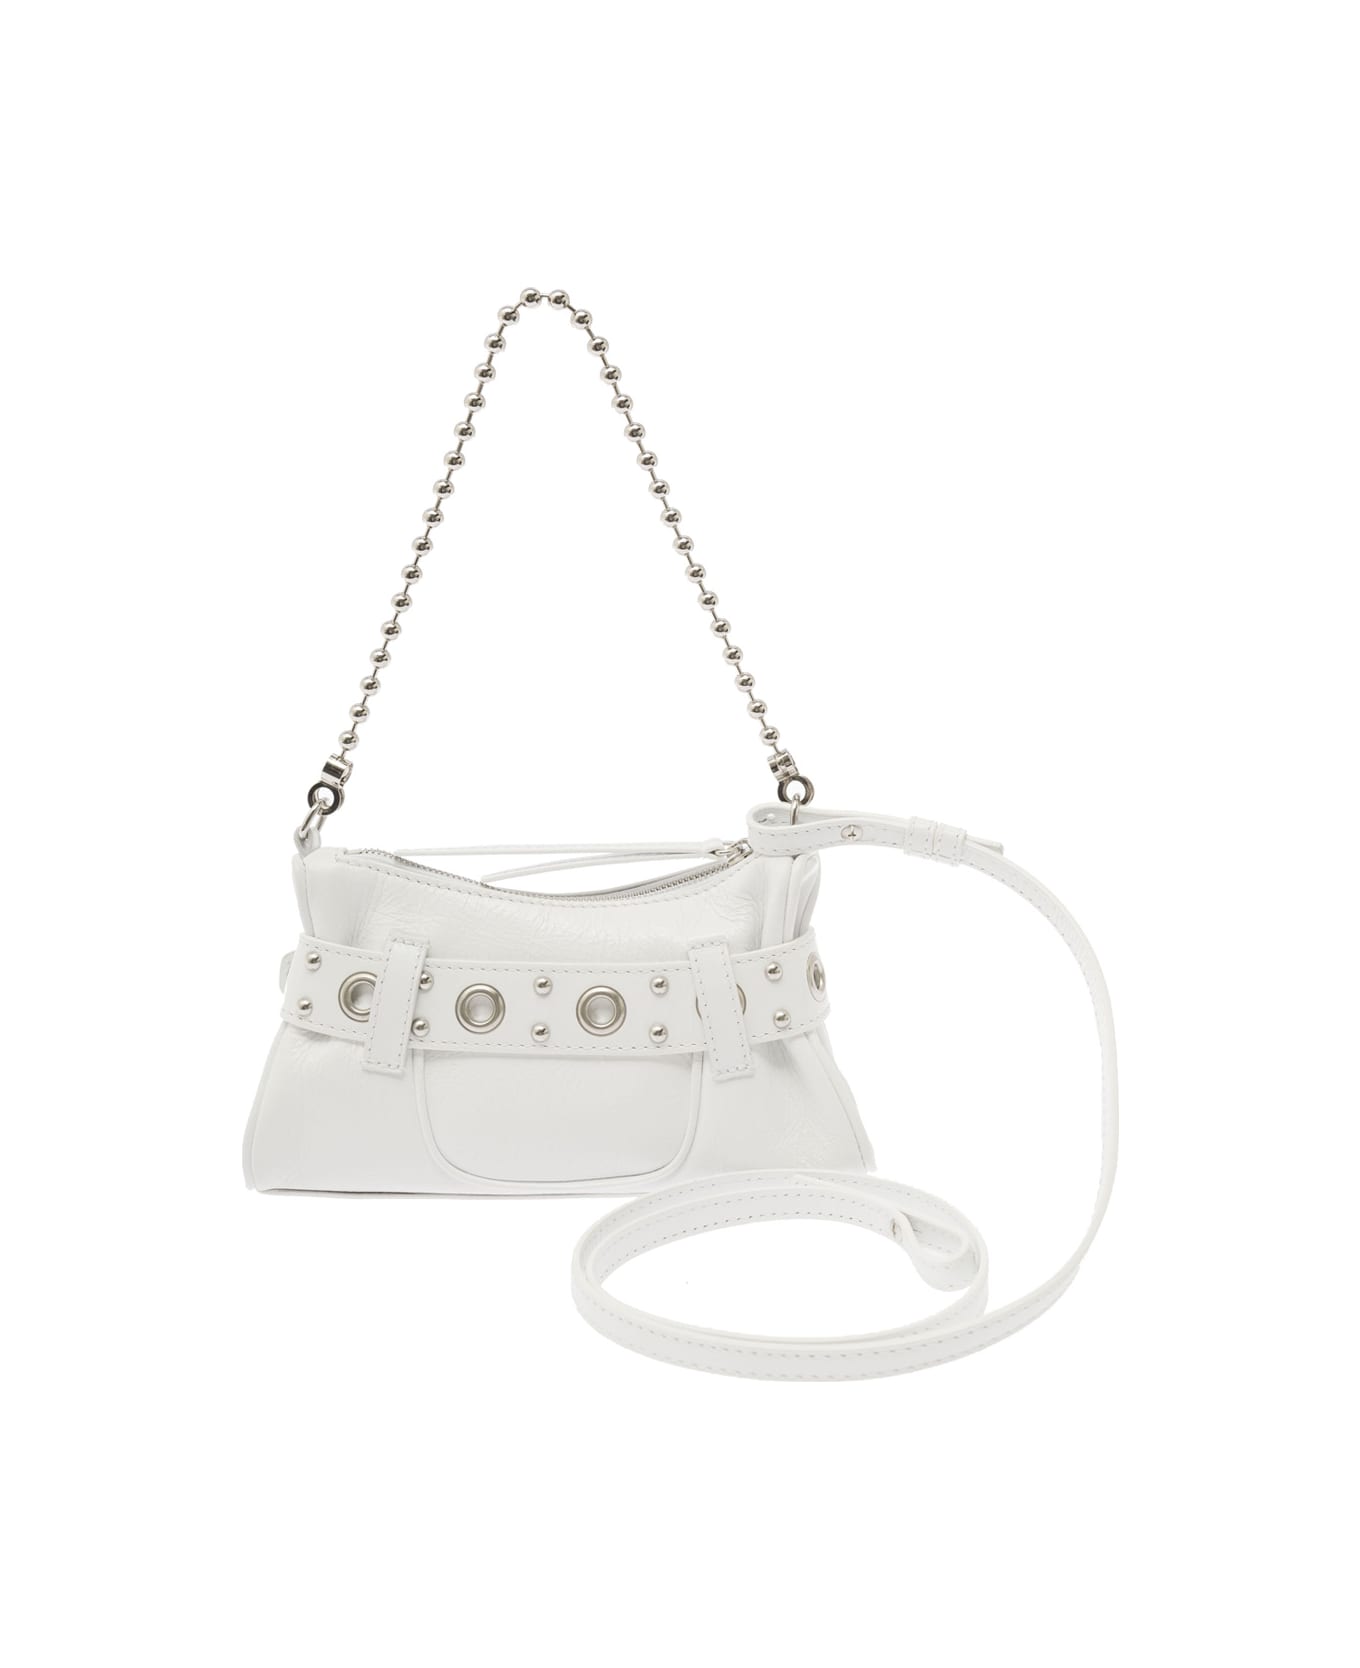 Dsquared2 'gothic' White Shoulder Bag With Belt Detail In Smooth Leather Woman - White ショルダーバッグ